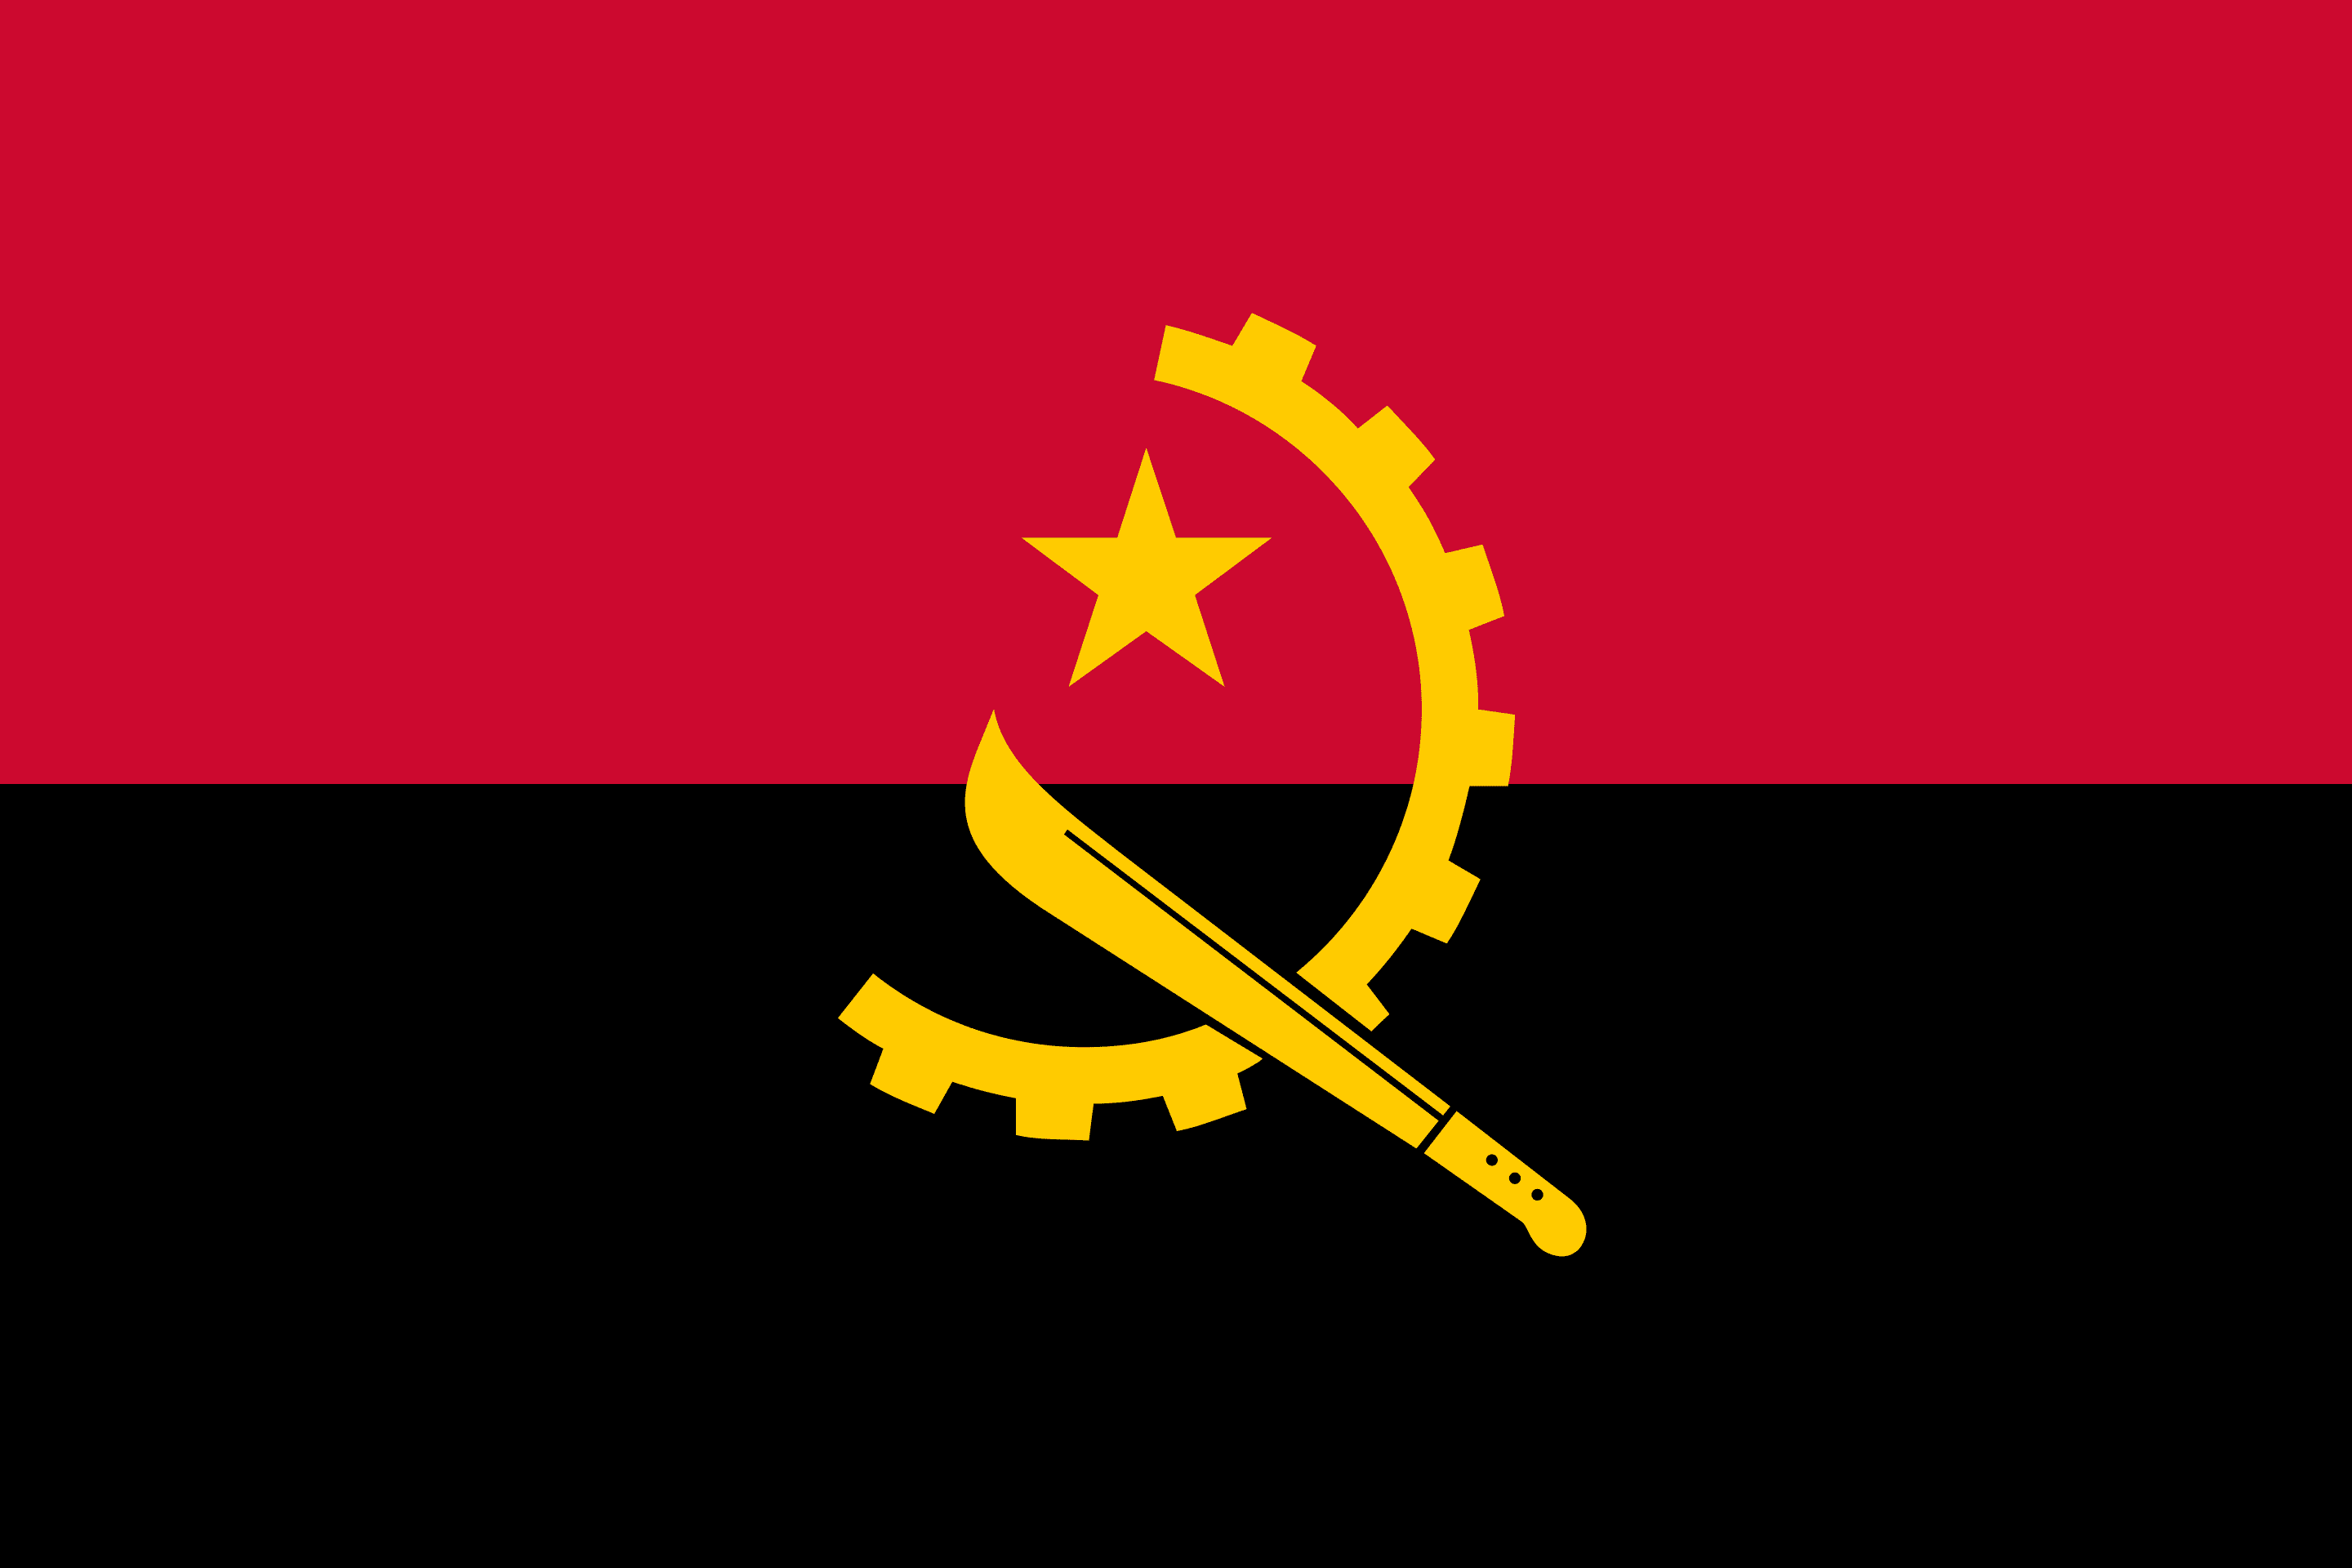 Facts about Angola